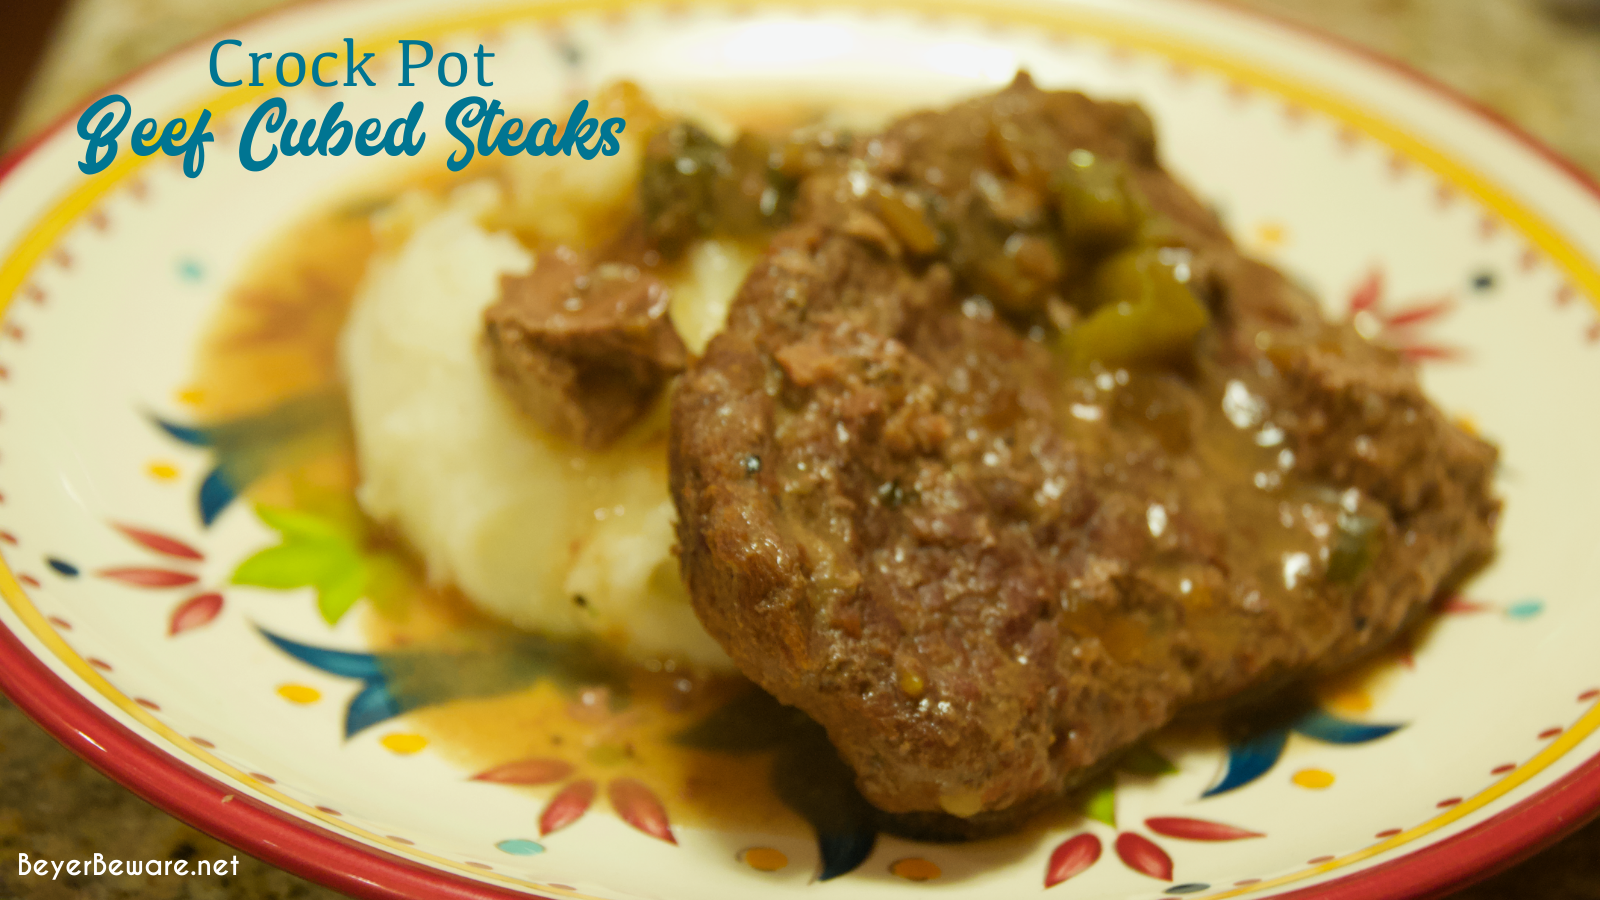 Crock pot beef cubed steak with gravy is a simple recipe that combines ...